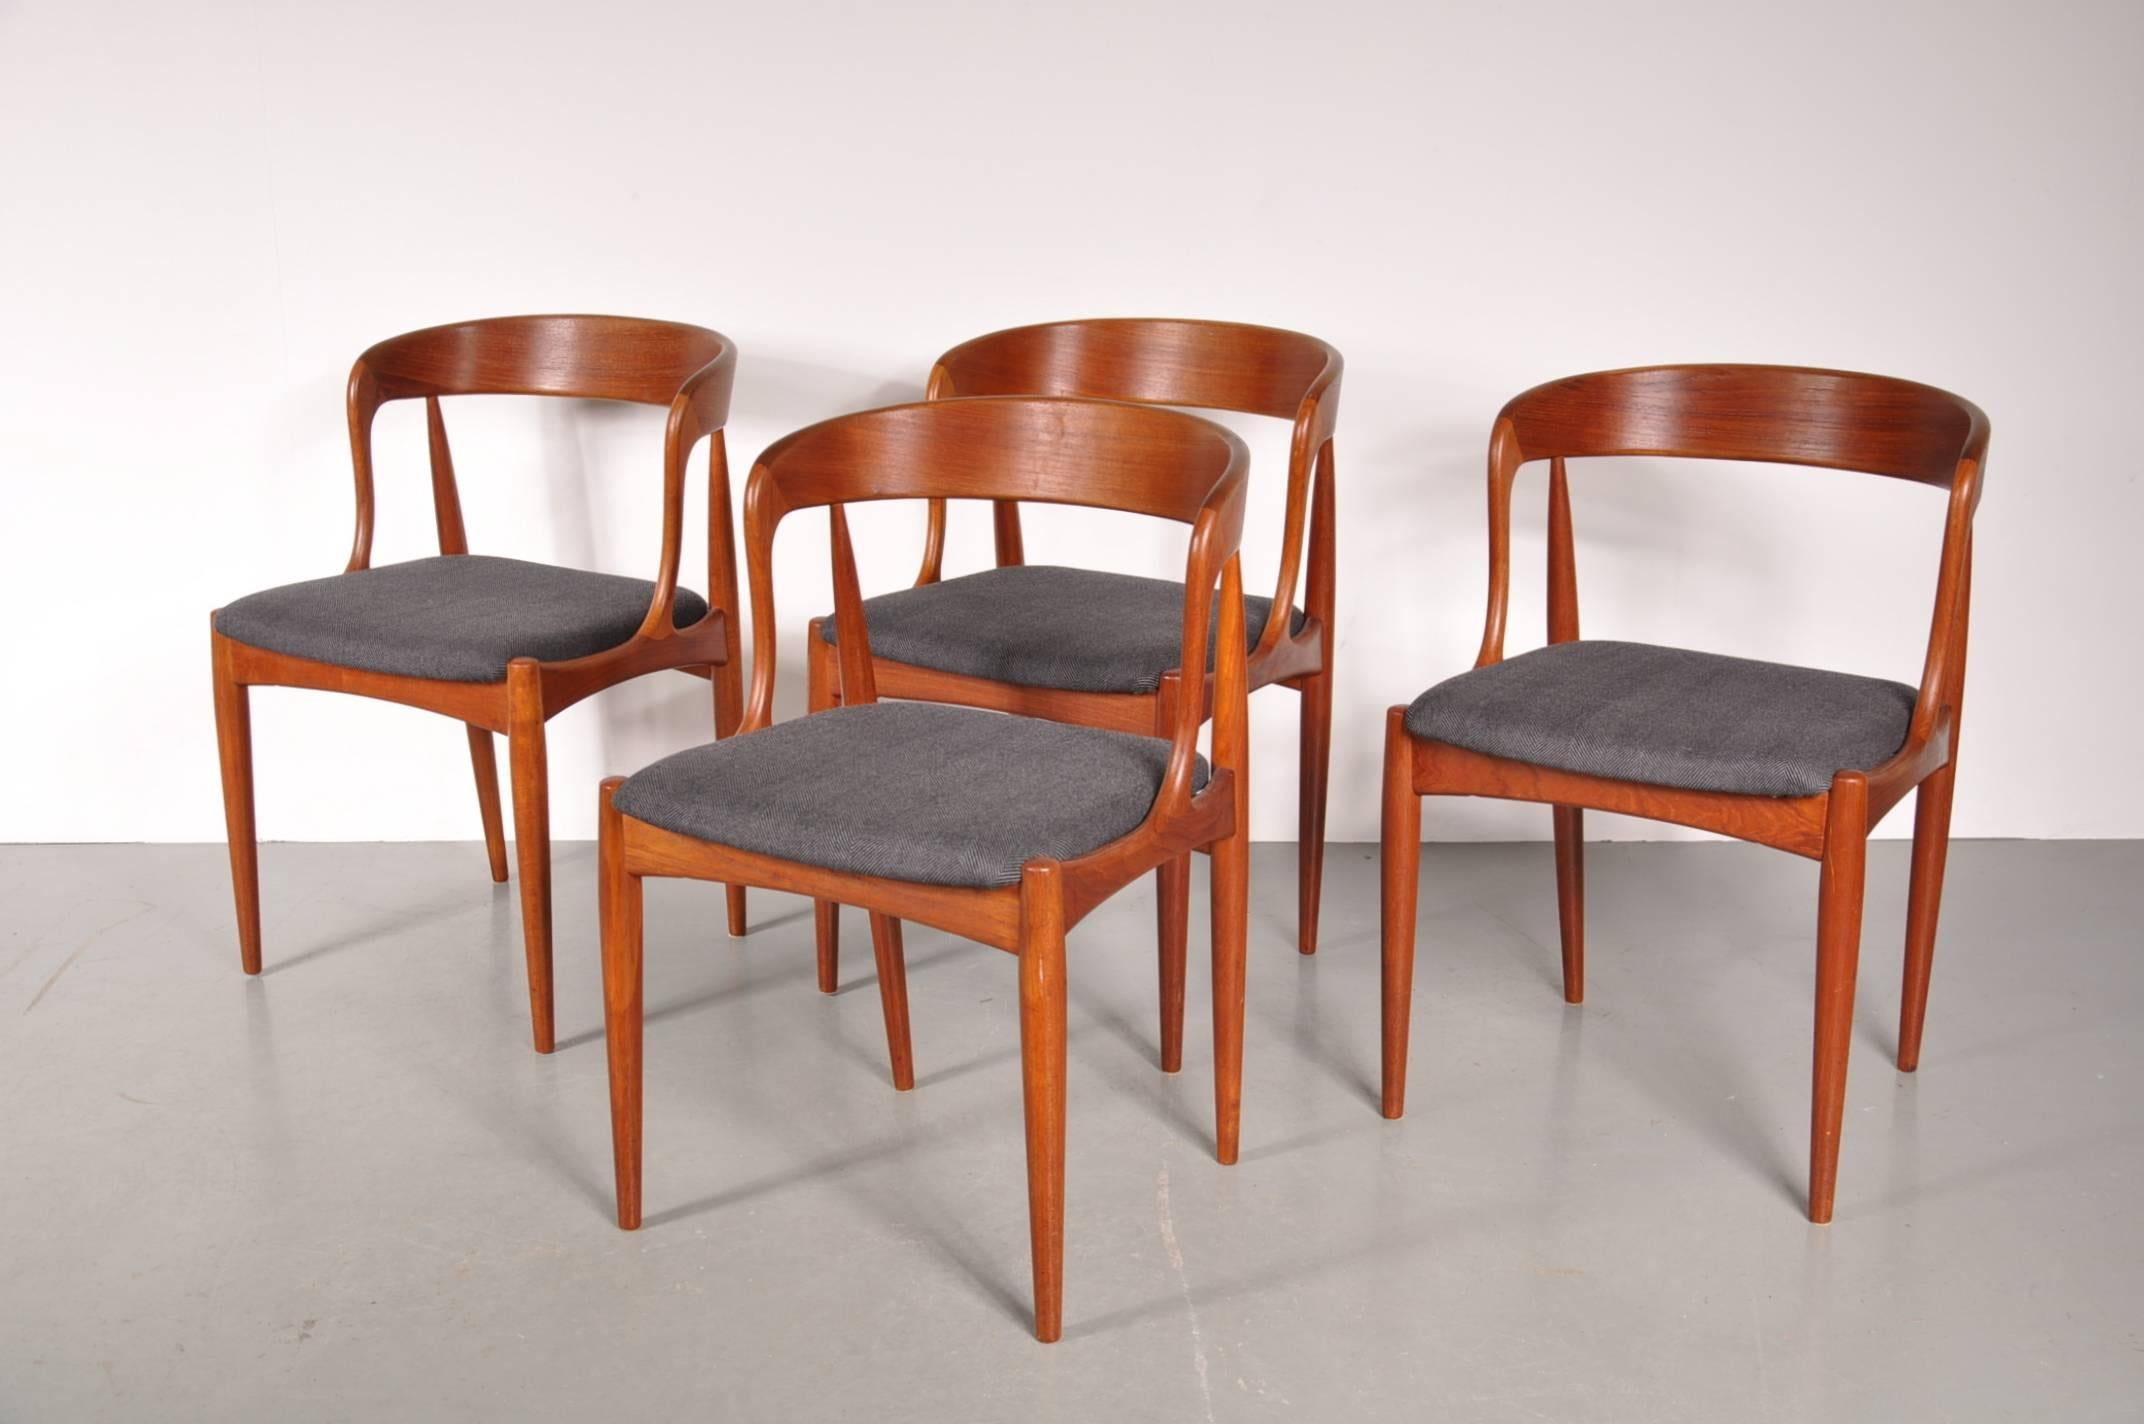 Mid-Century Modern Set of Four Dining Chairs by Johannes Andersen, Denmark, circa 1950